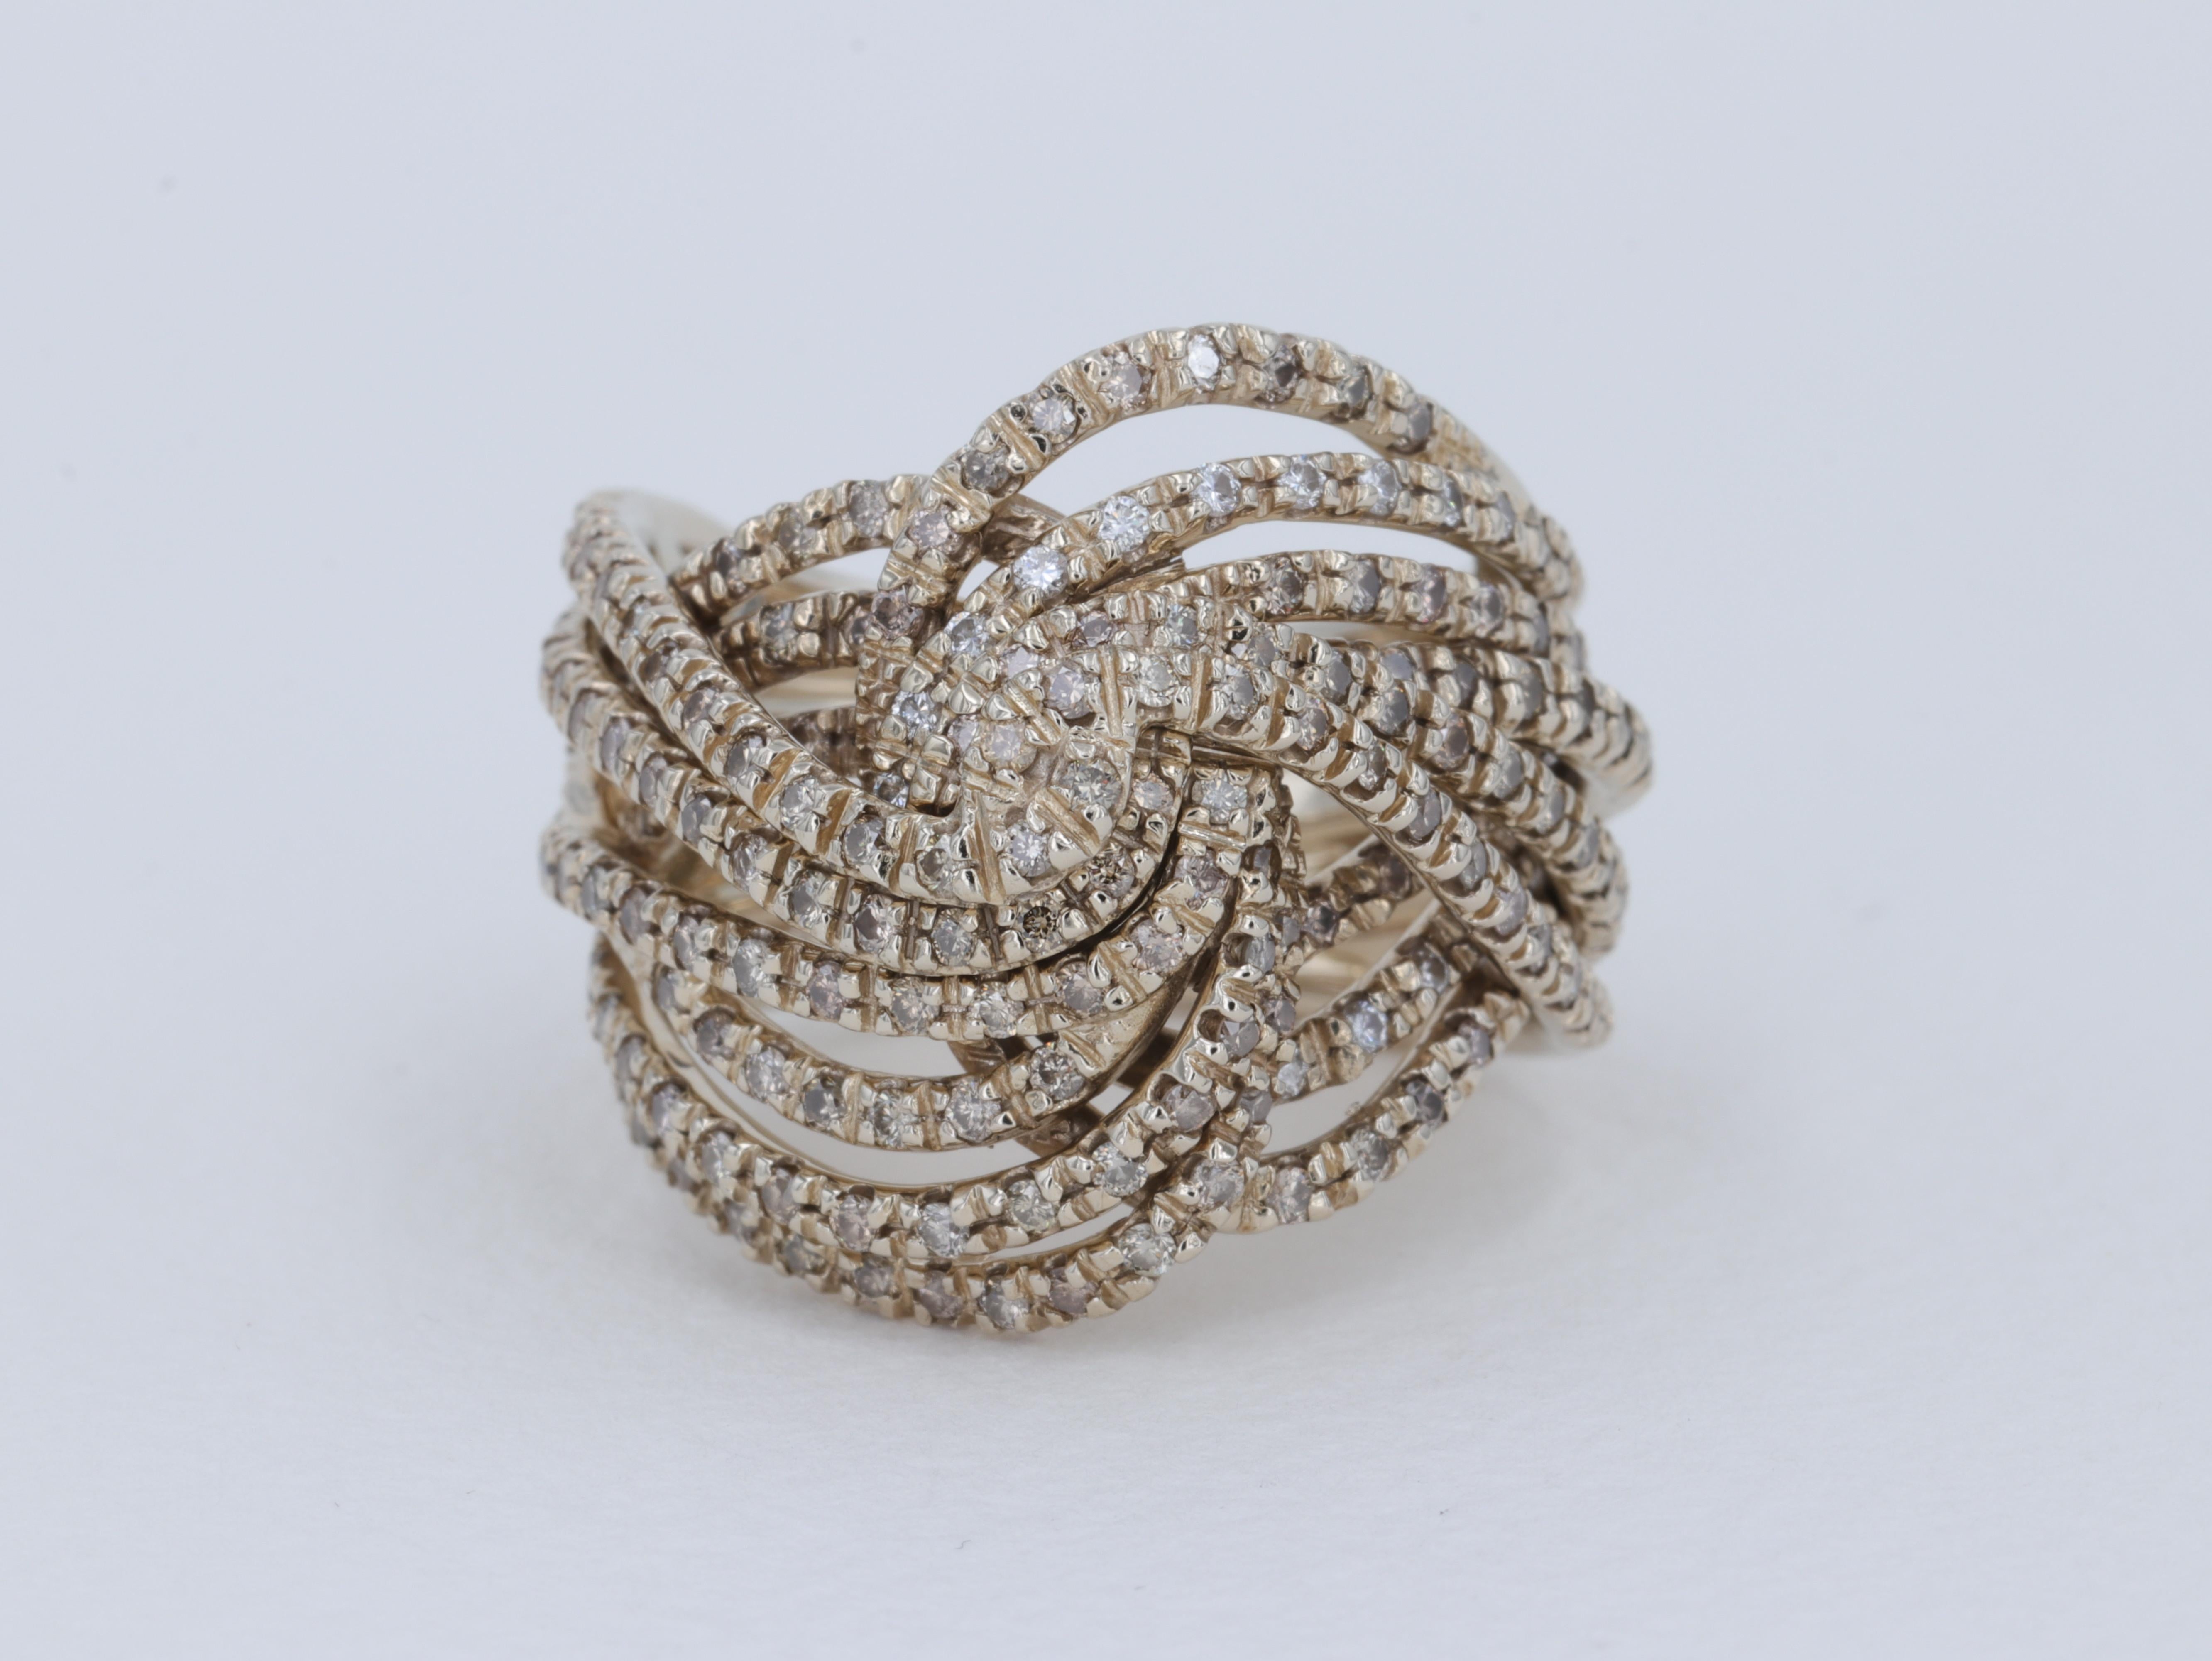 An iconic collection by H Stern the Zephyr ring features multiple rows of 18 karat 